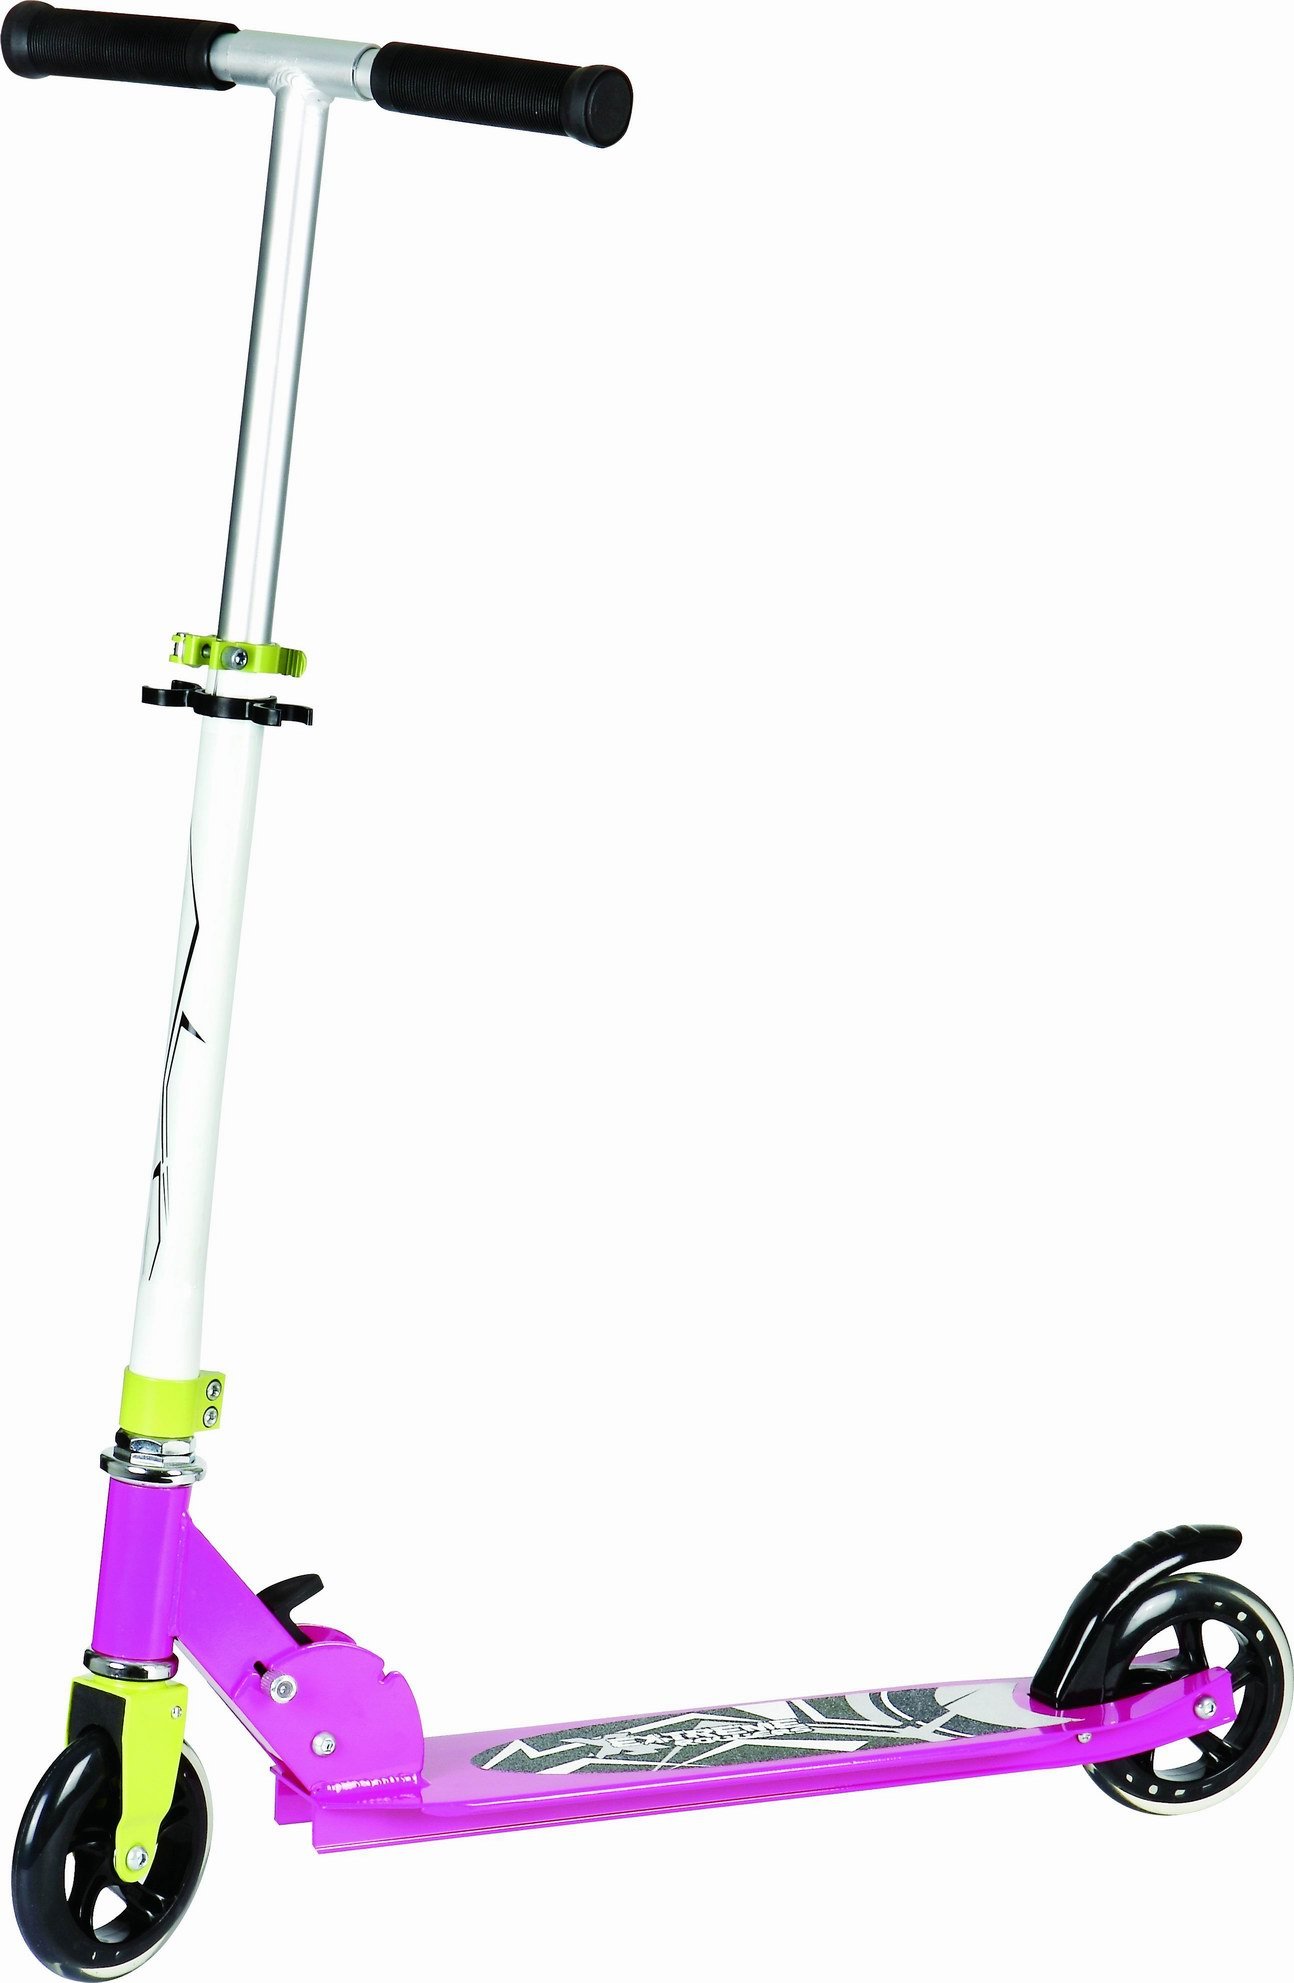 Full aluminum scooter with 125mm PU wheel